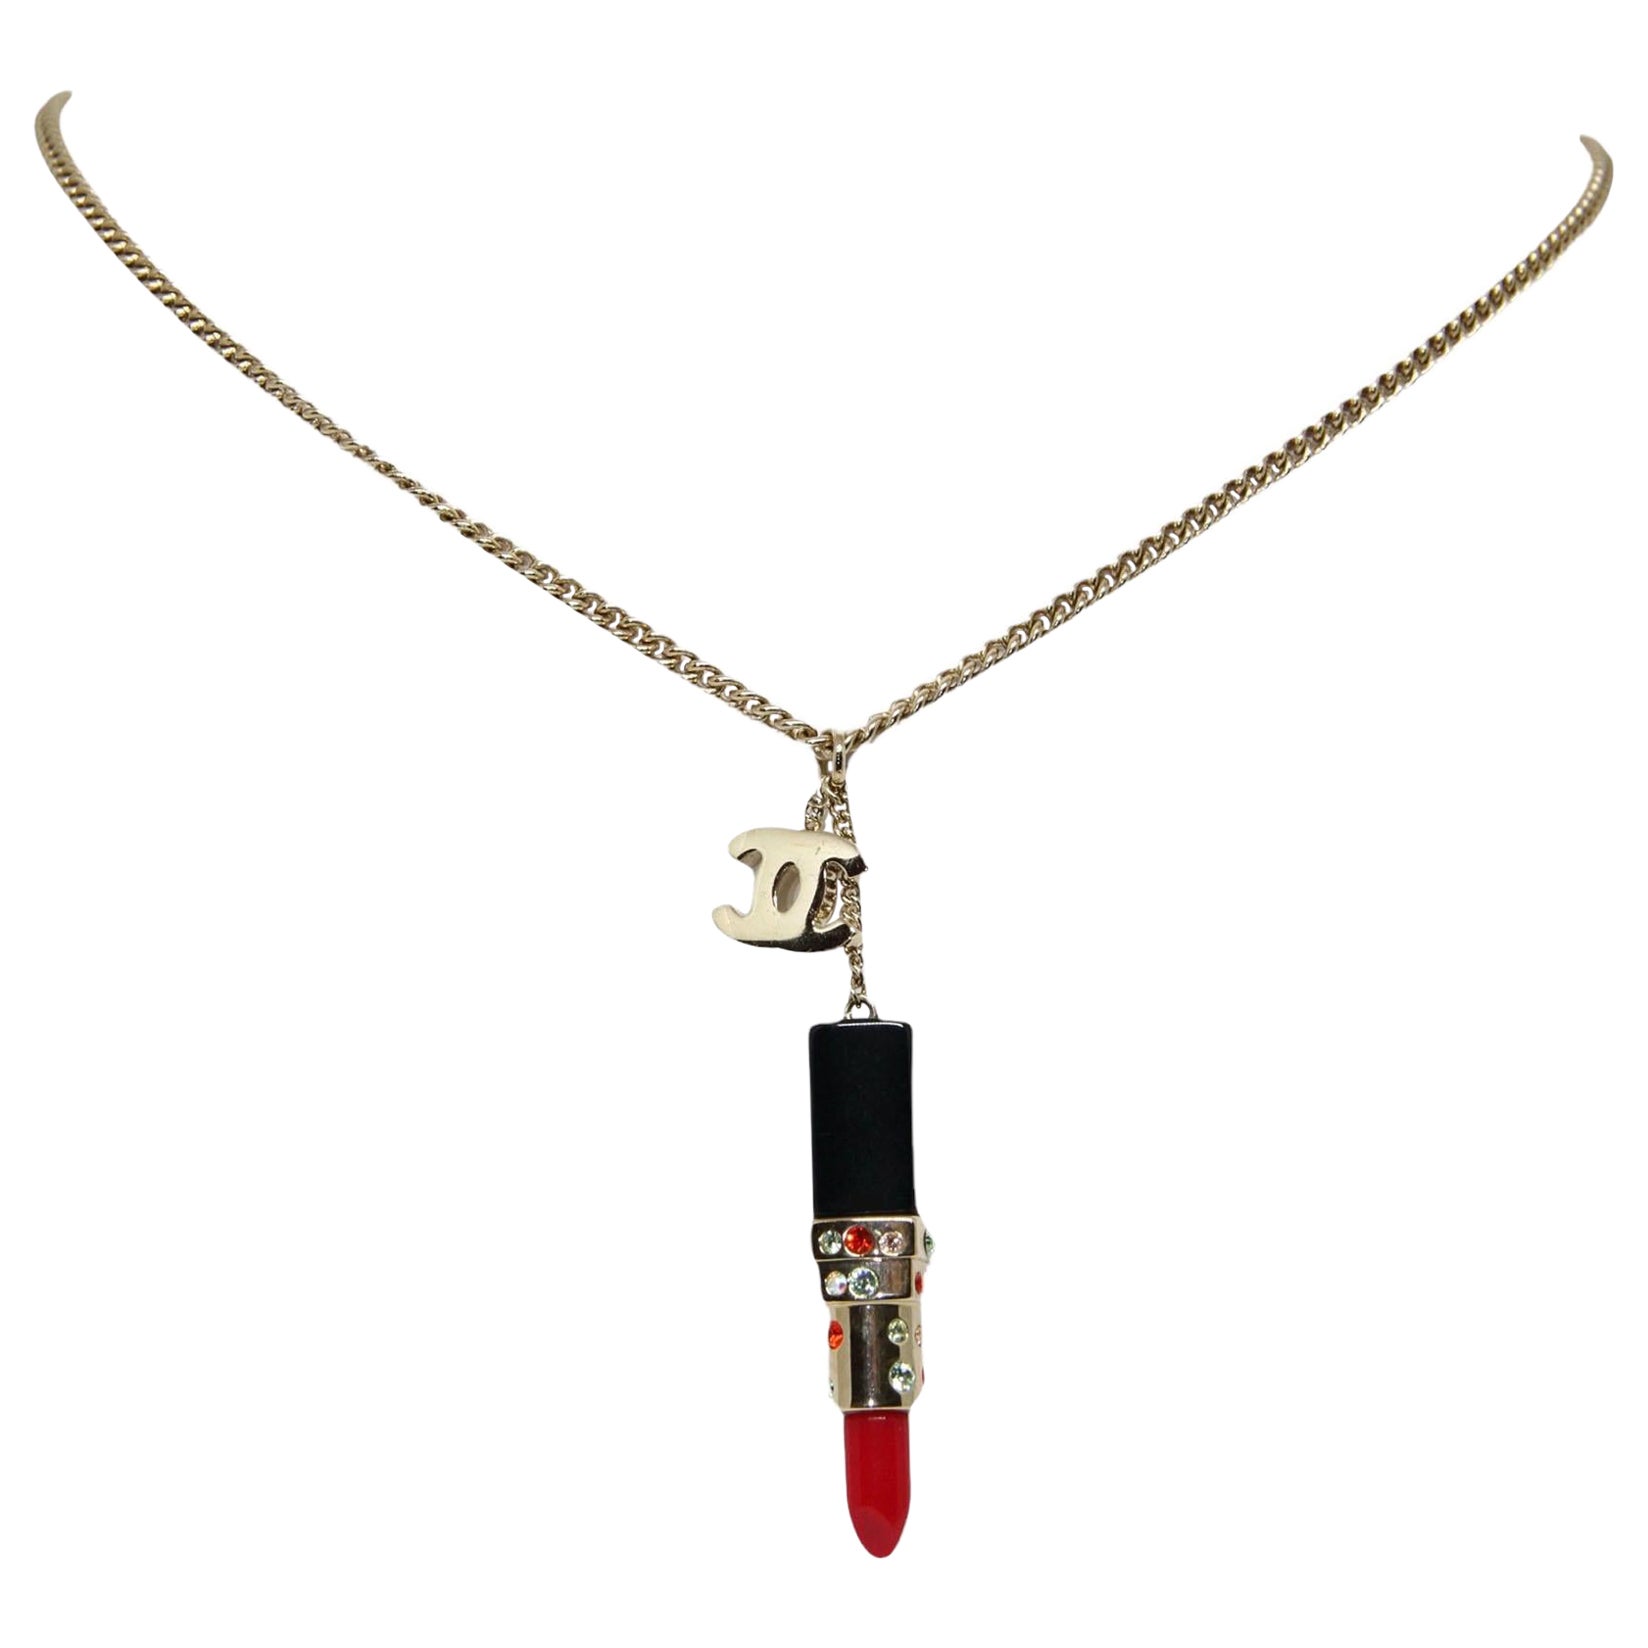 Chanel Lipstick and Gold Tone CC Charm Pendant Necklace